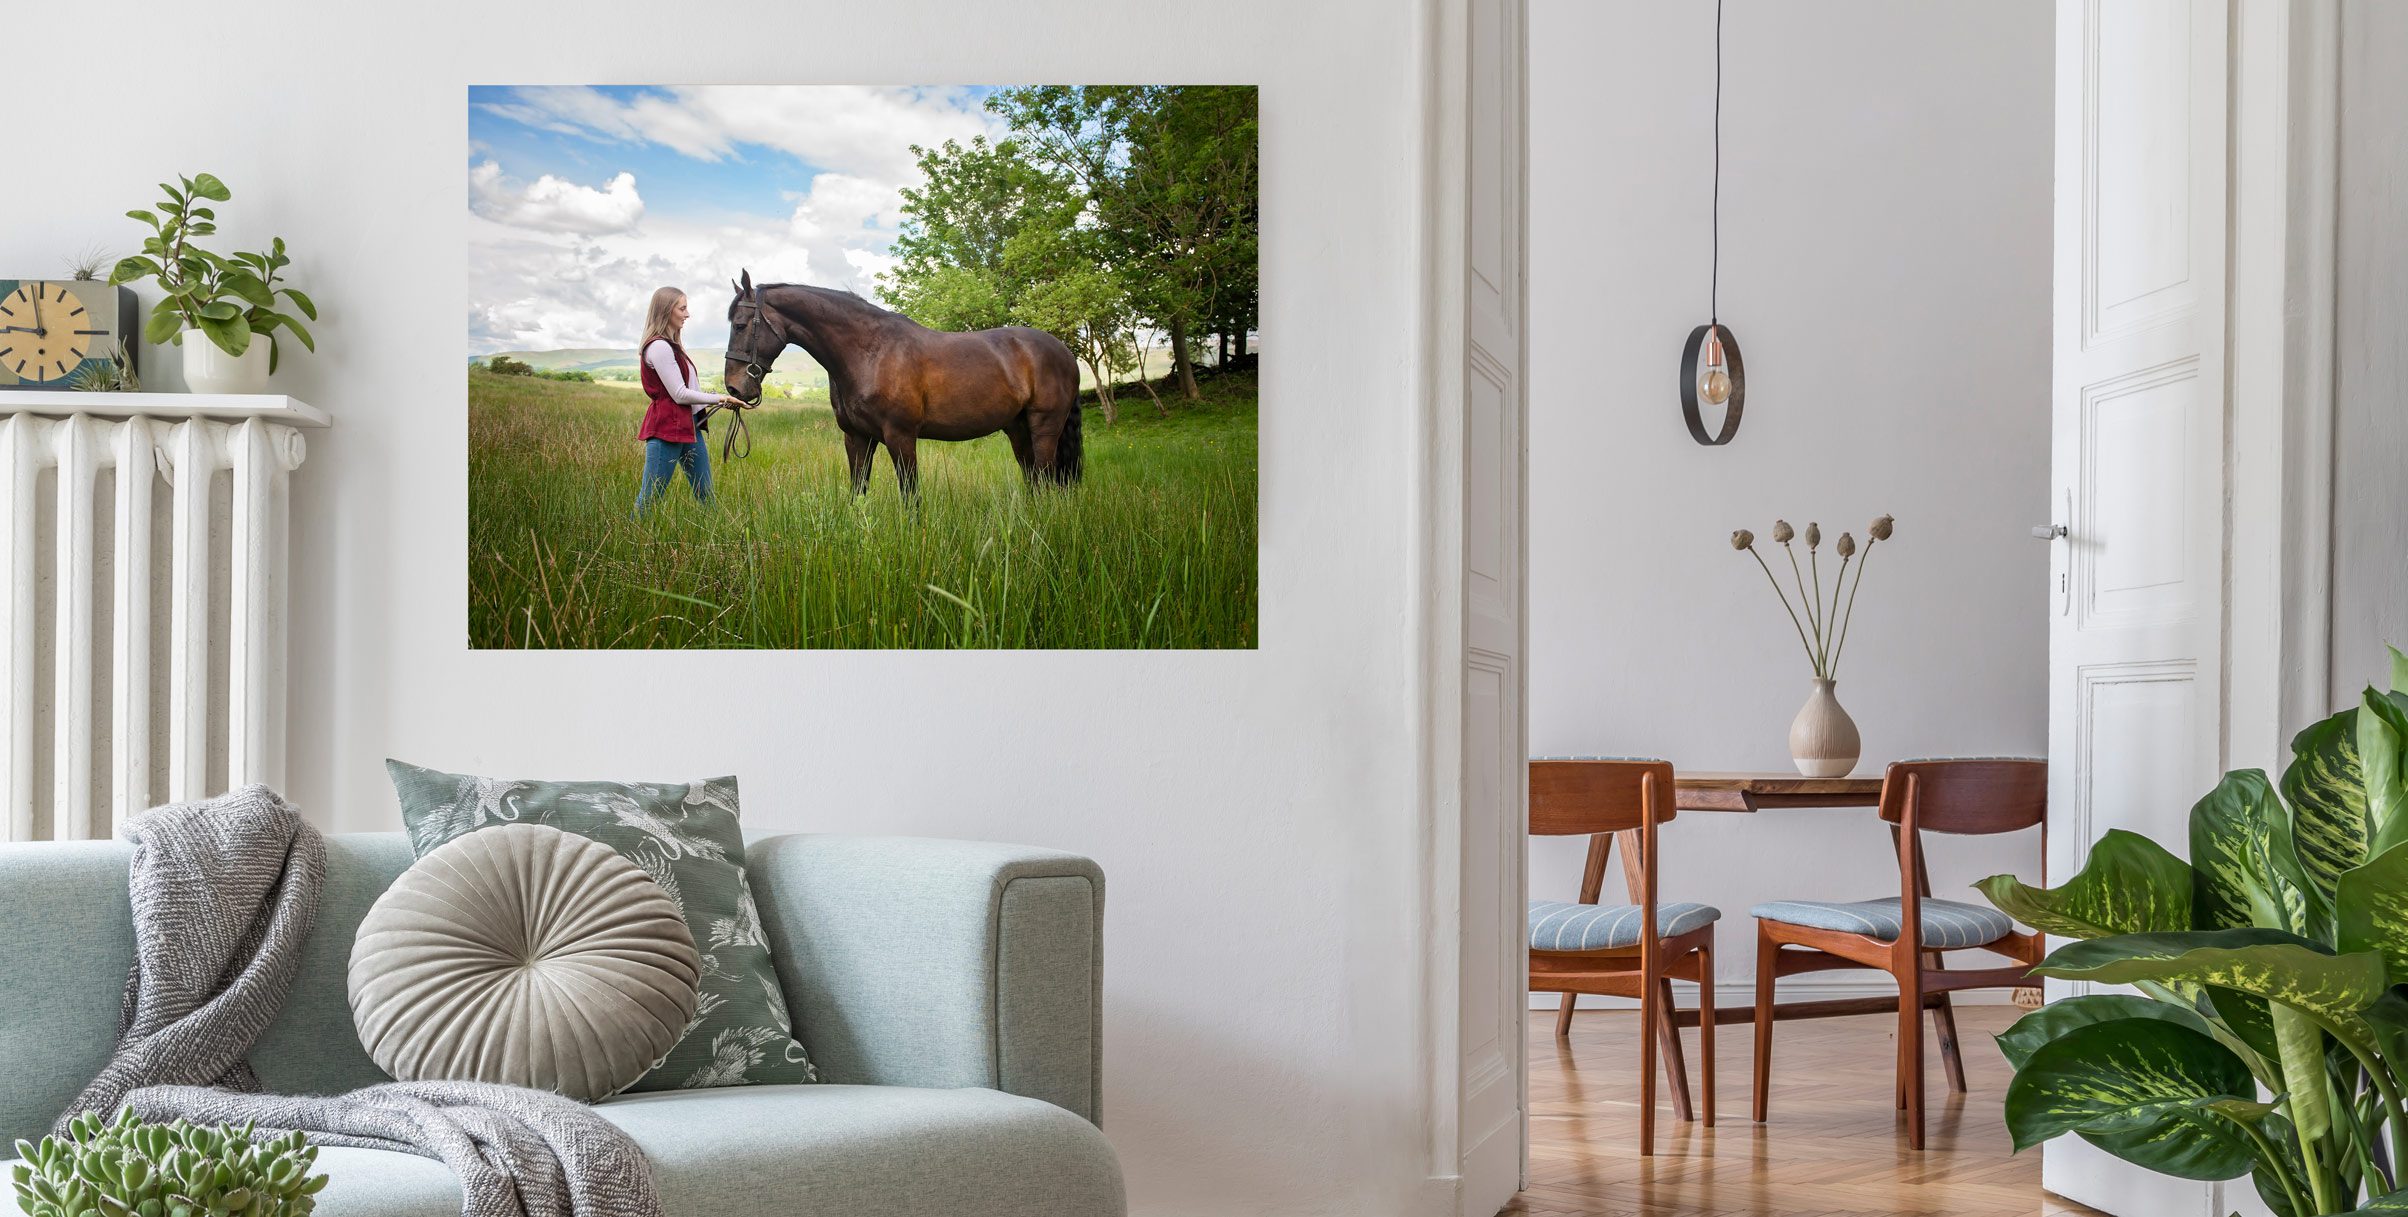 Equine Art work on your wall